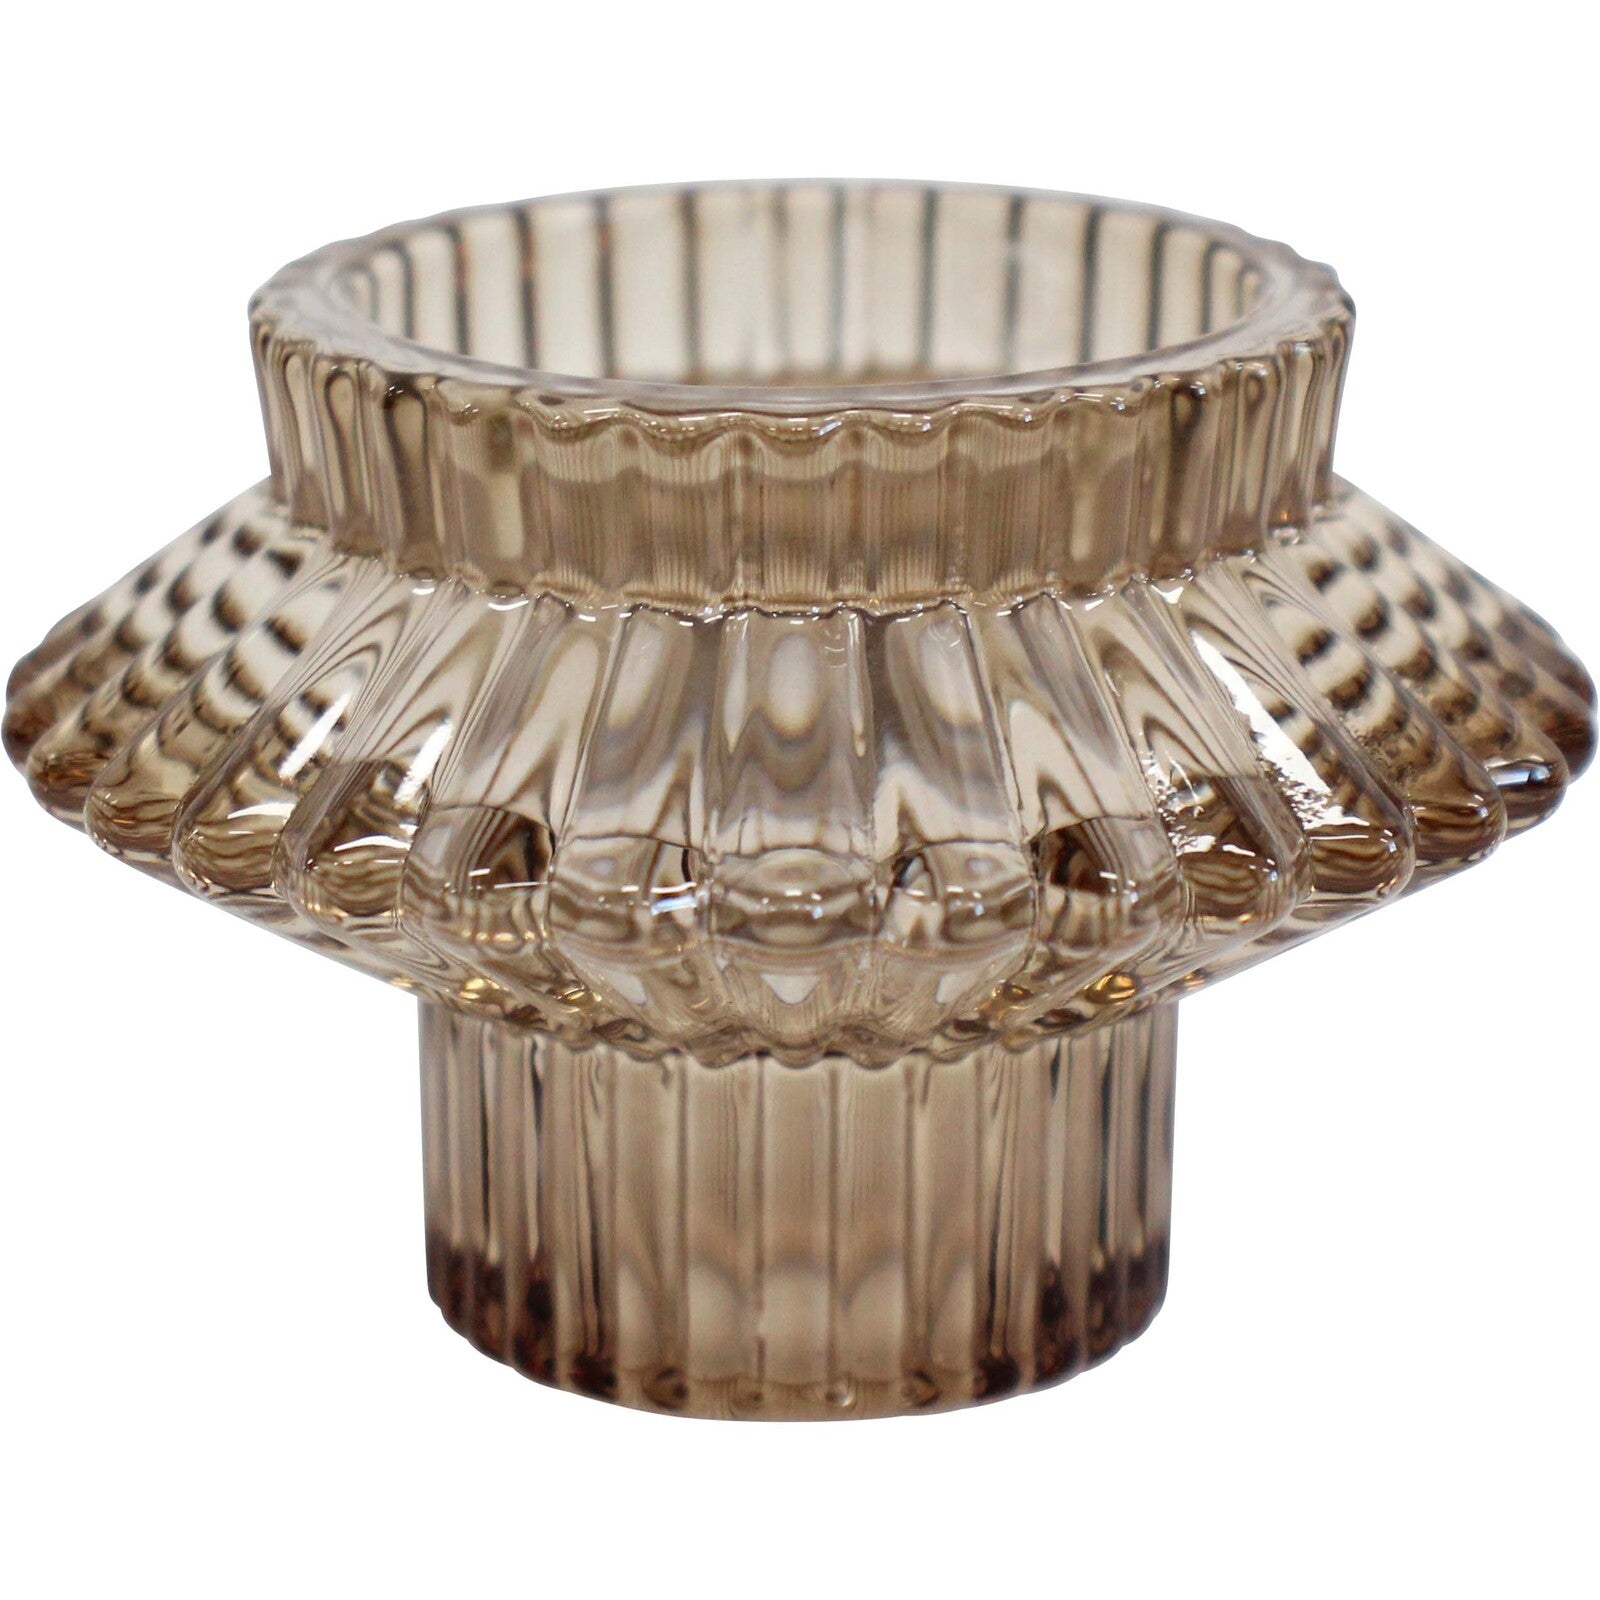 Double Sided Candle Holder Morocco-Decor Items-Lavida-The Bay Room